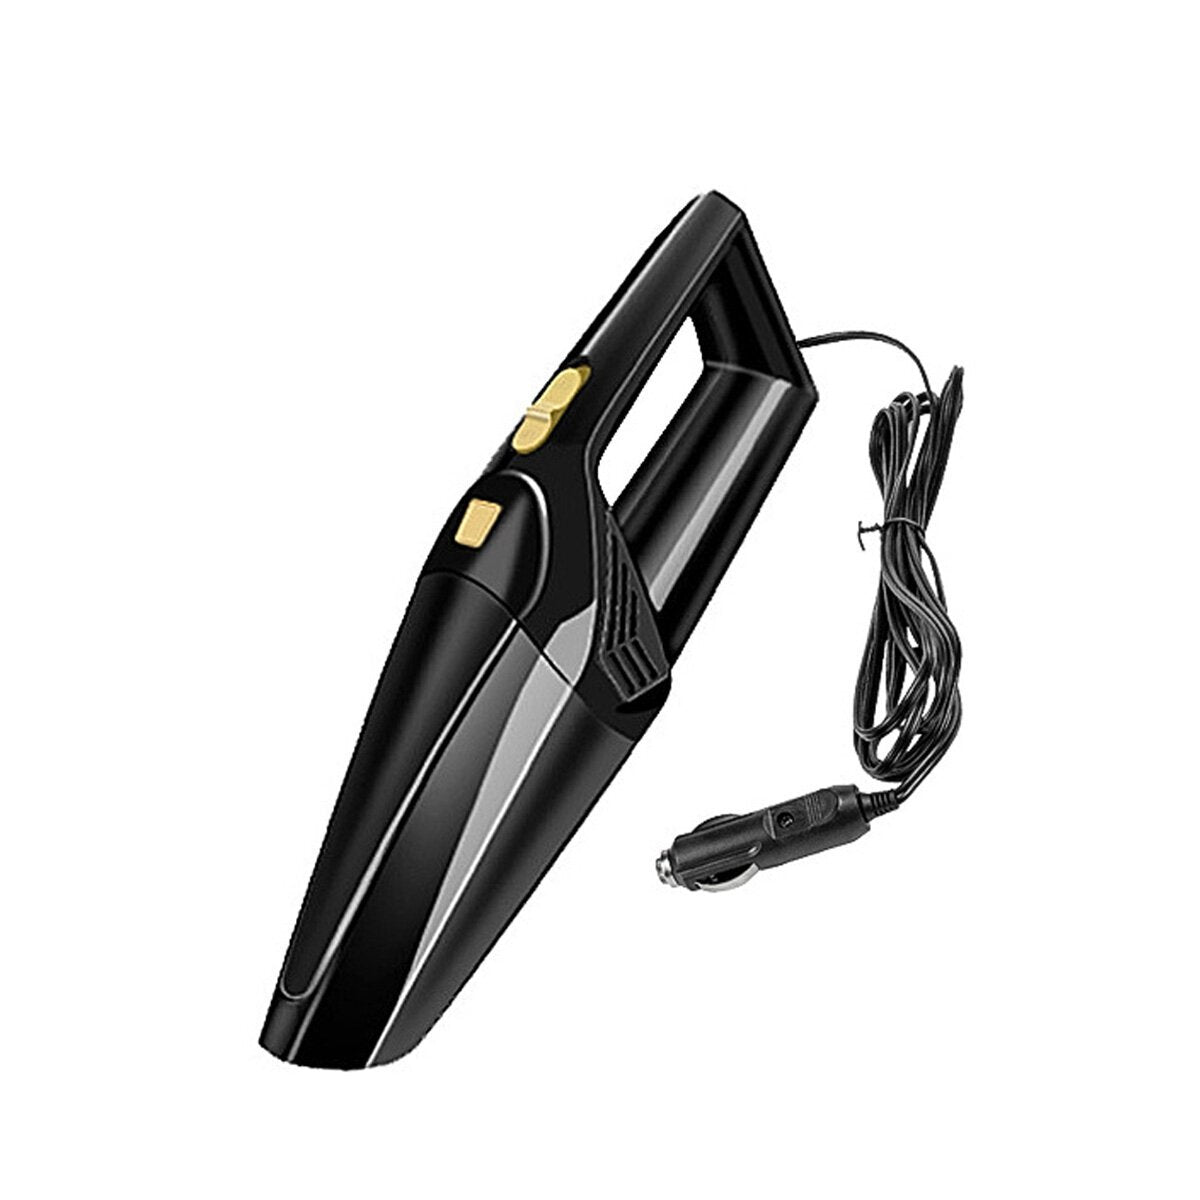 Car Vacuum Cleaner Wired Handheld Rechargeable Portable Wet&Dry for Home Car